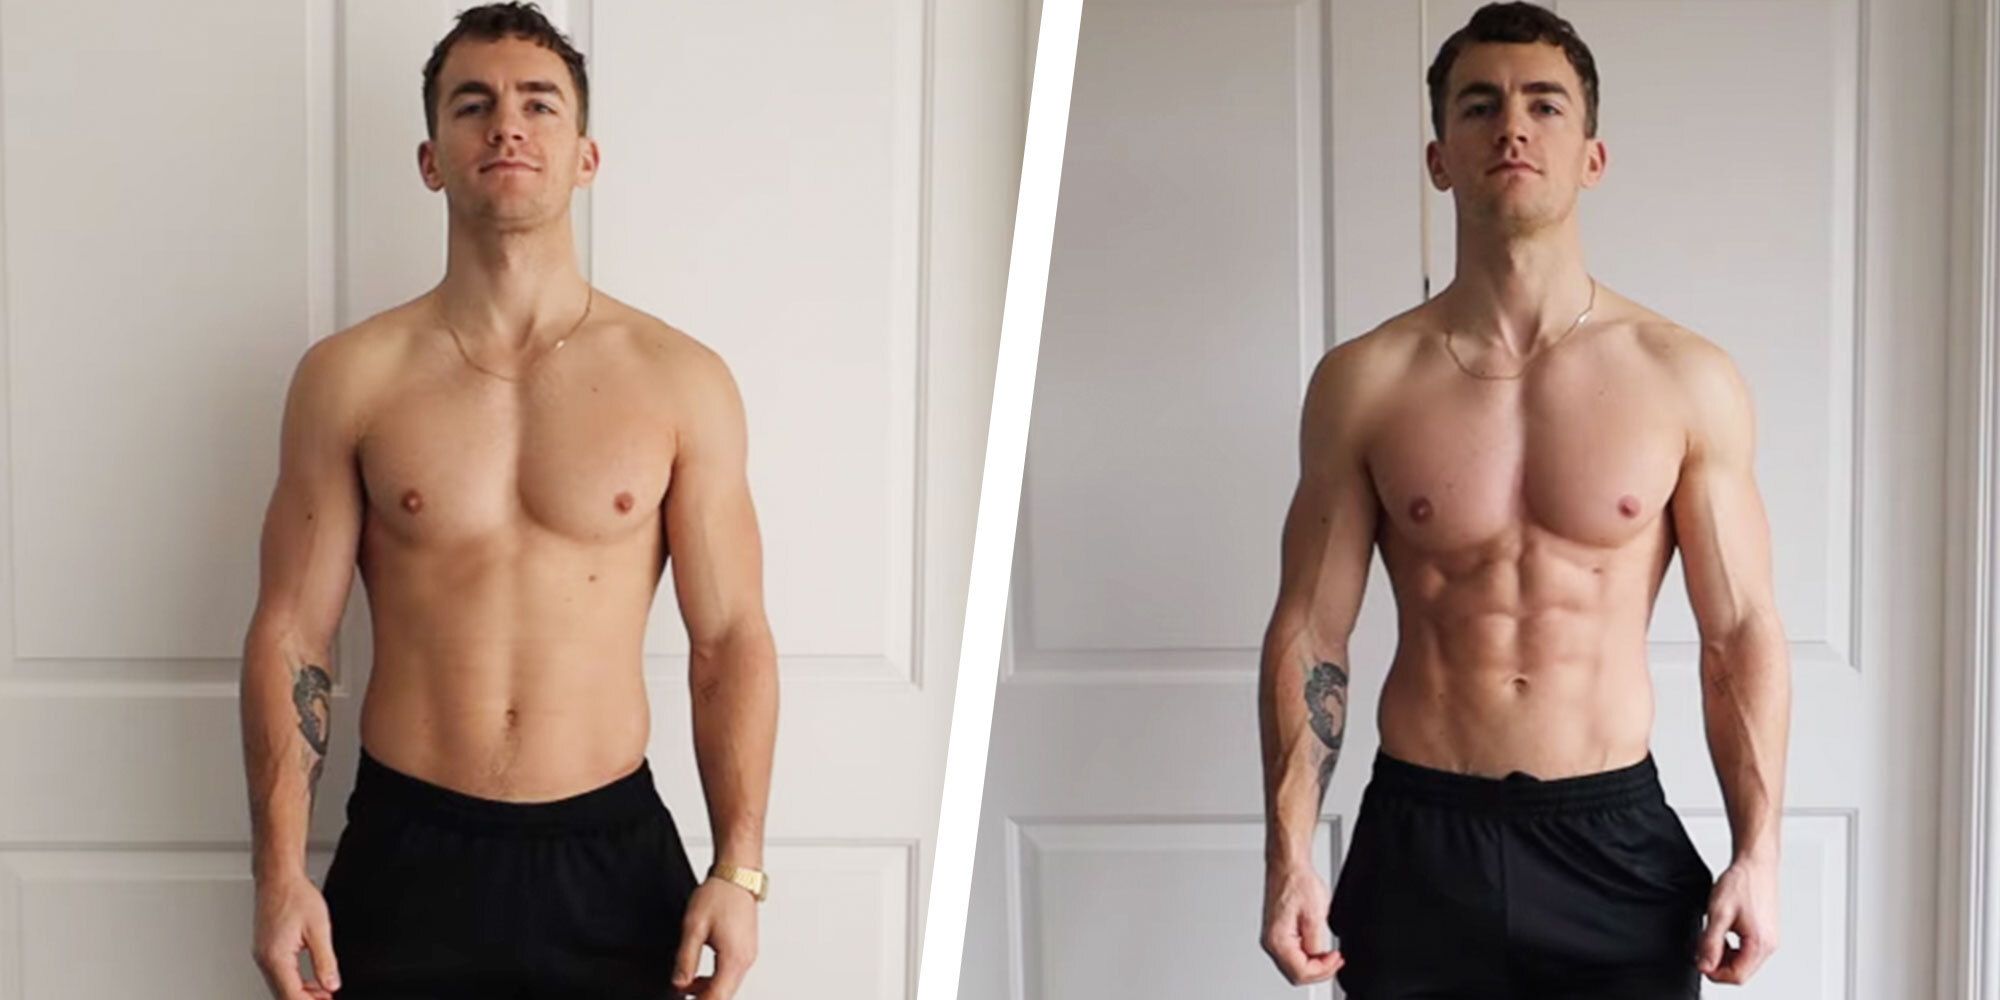 How This Guy Burned Fat And Shredded His Abs In Just 2 Weeks